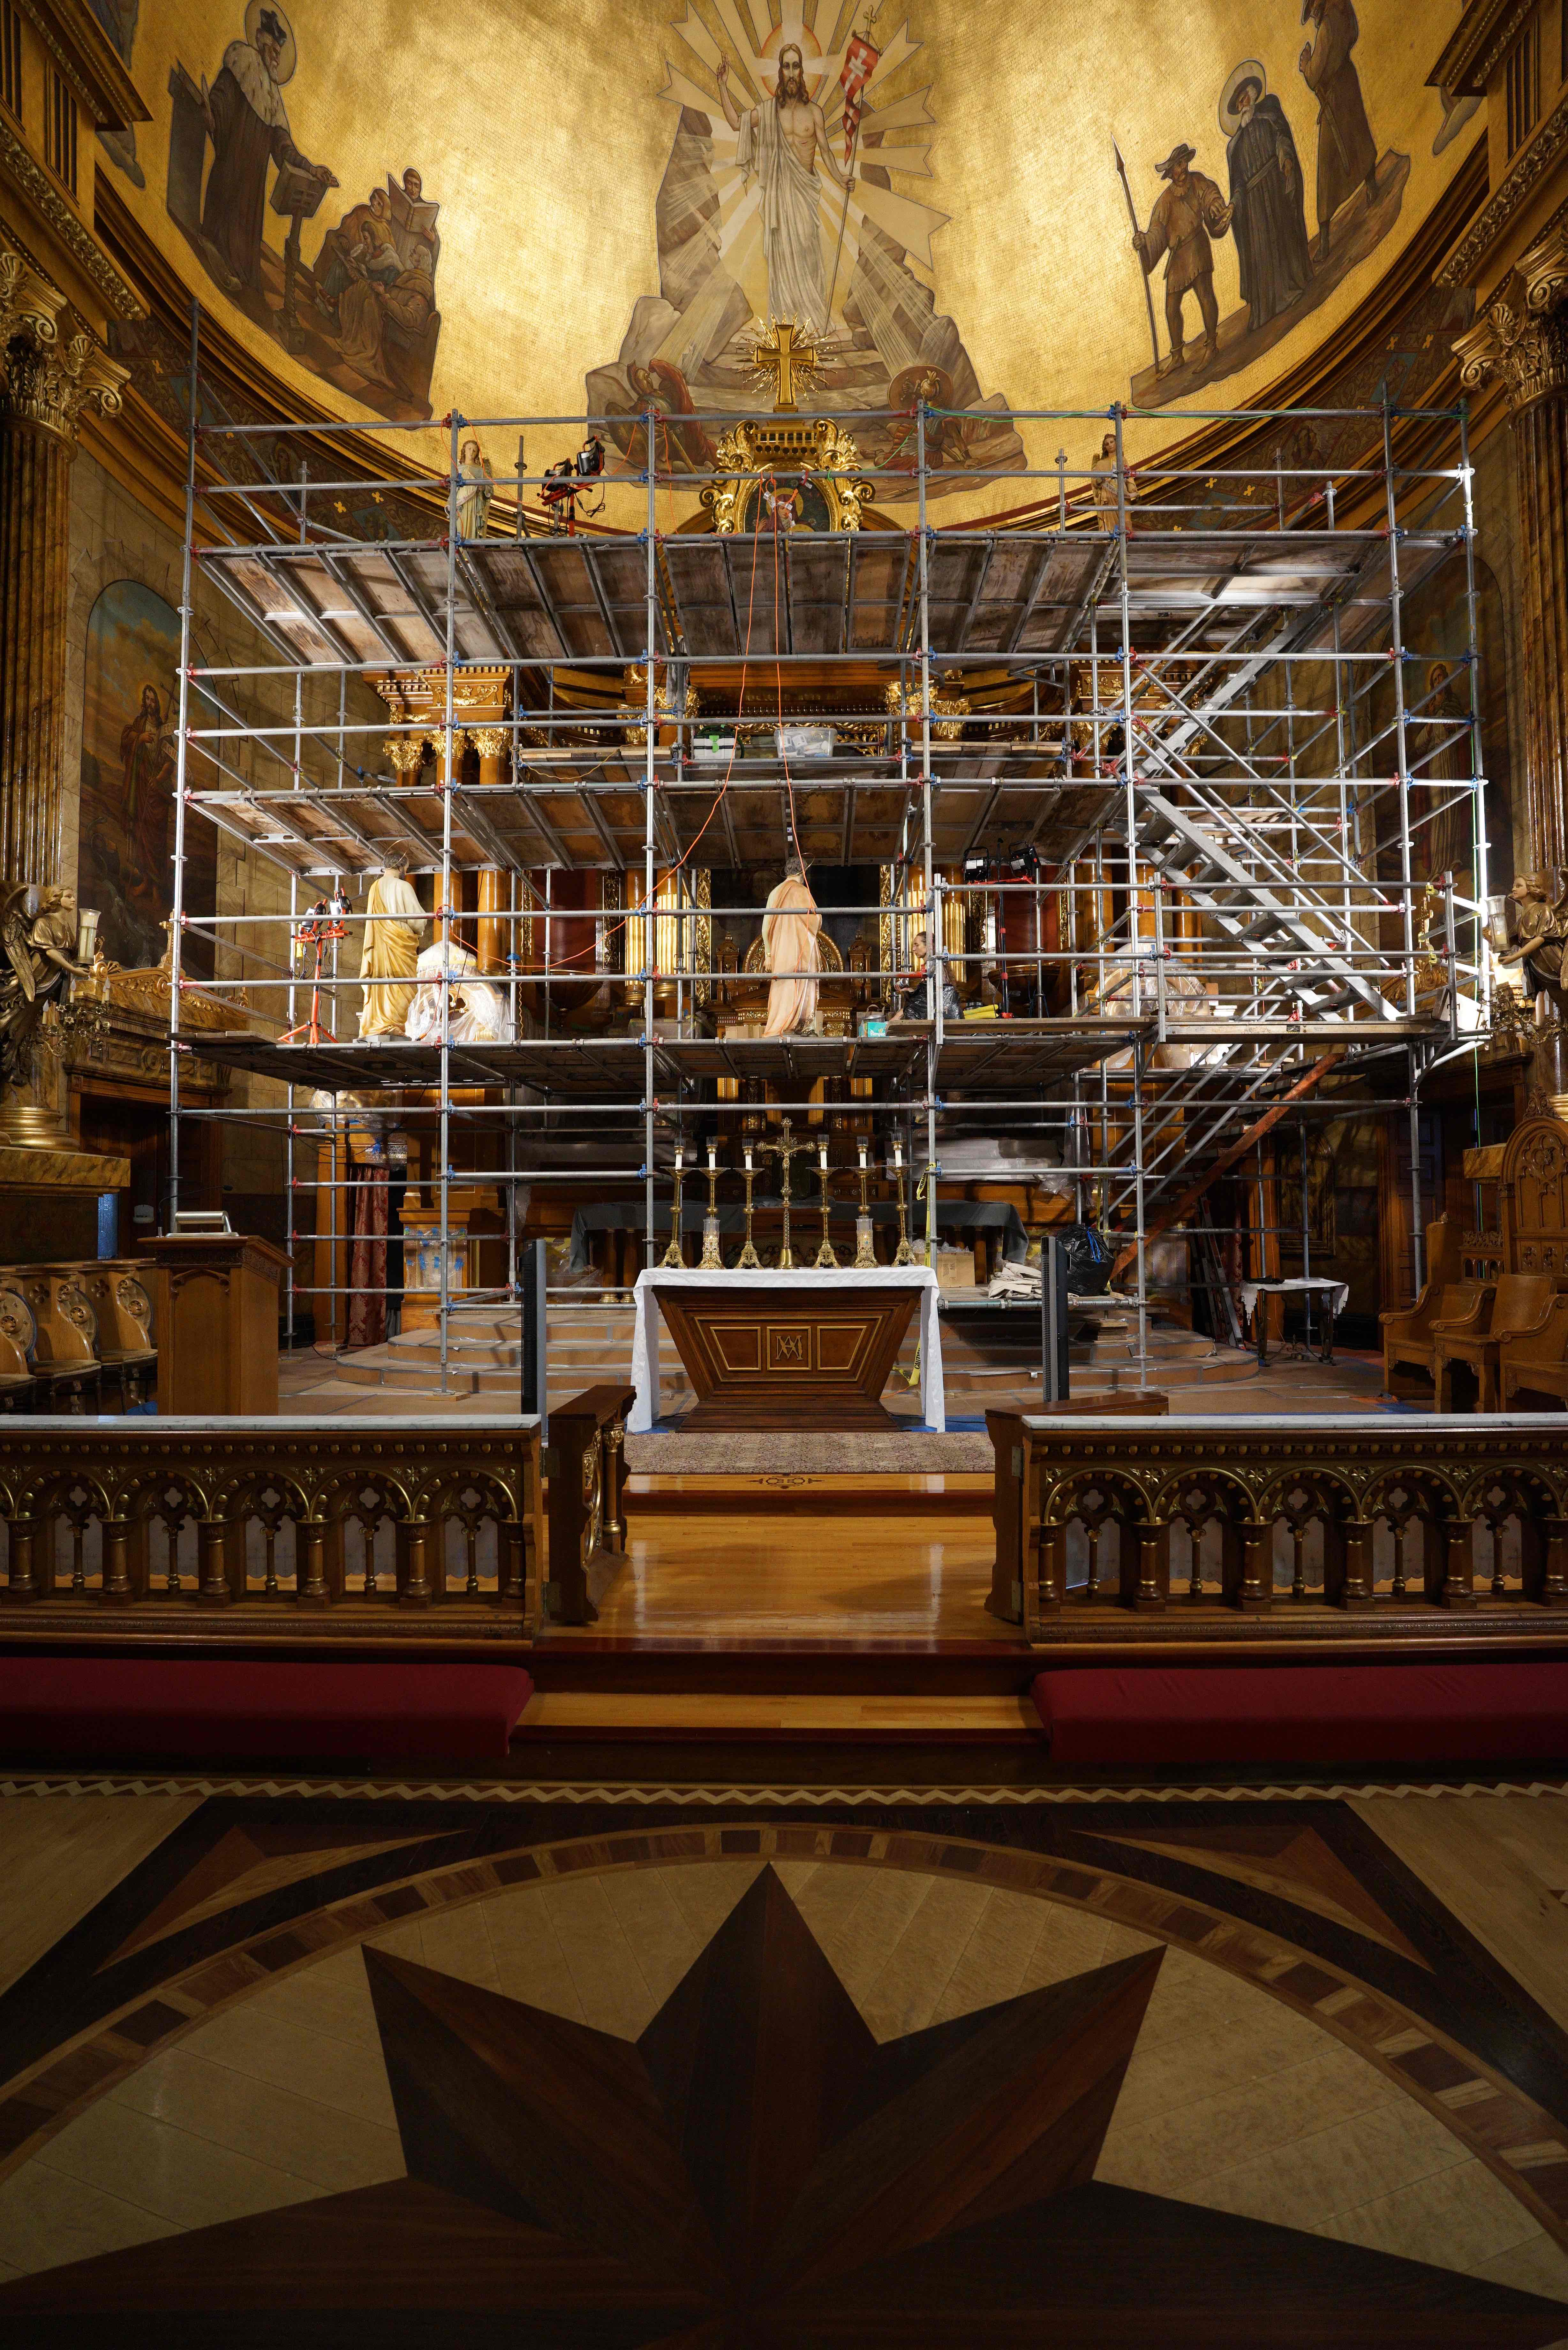 Altar with scaffolding during gilding restoration